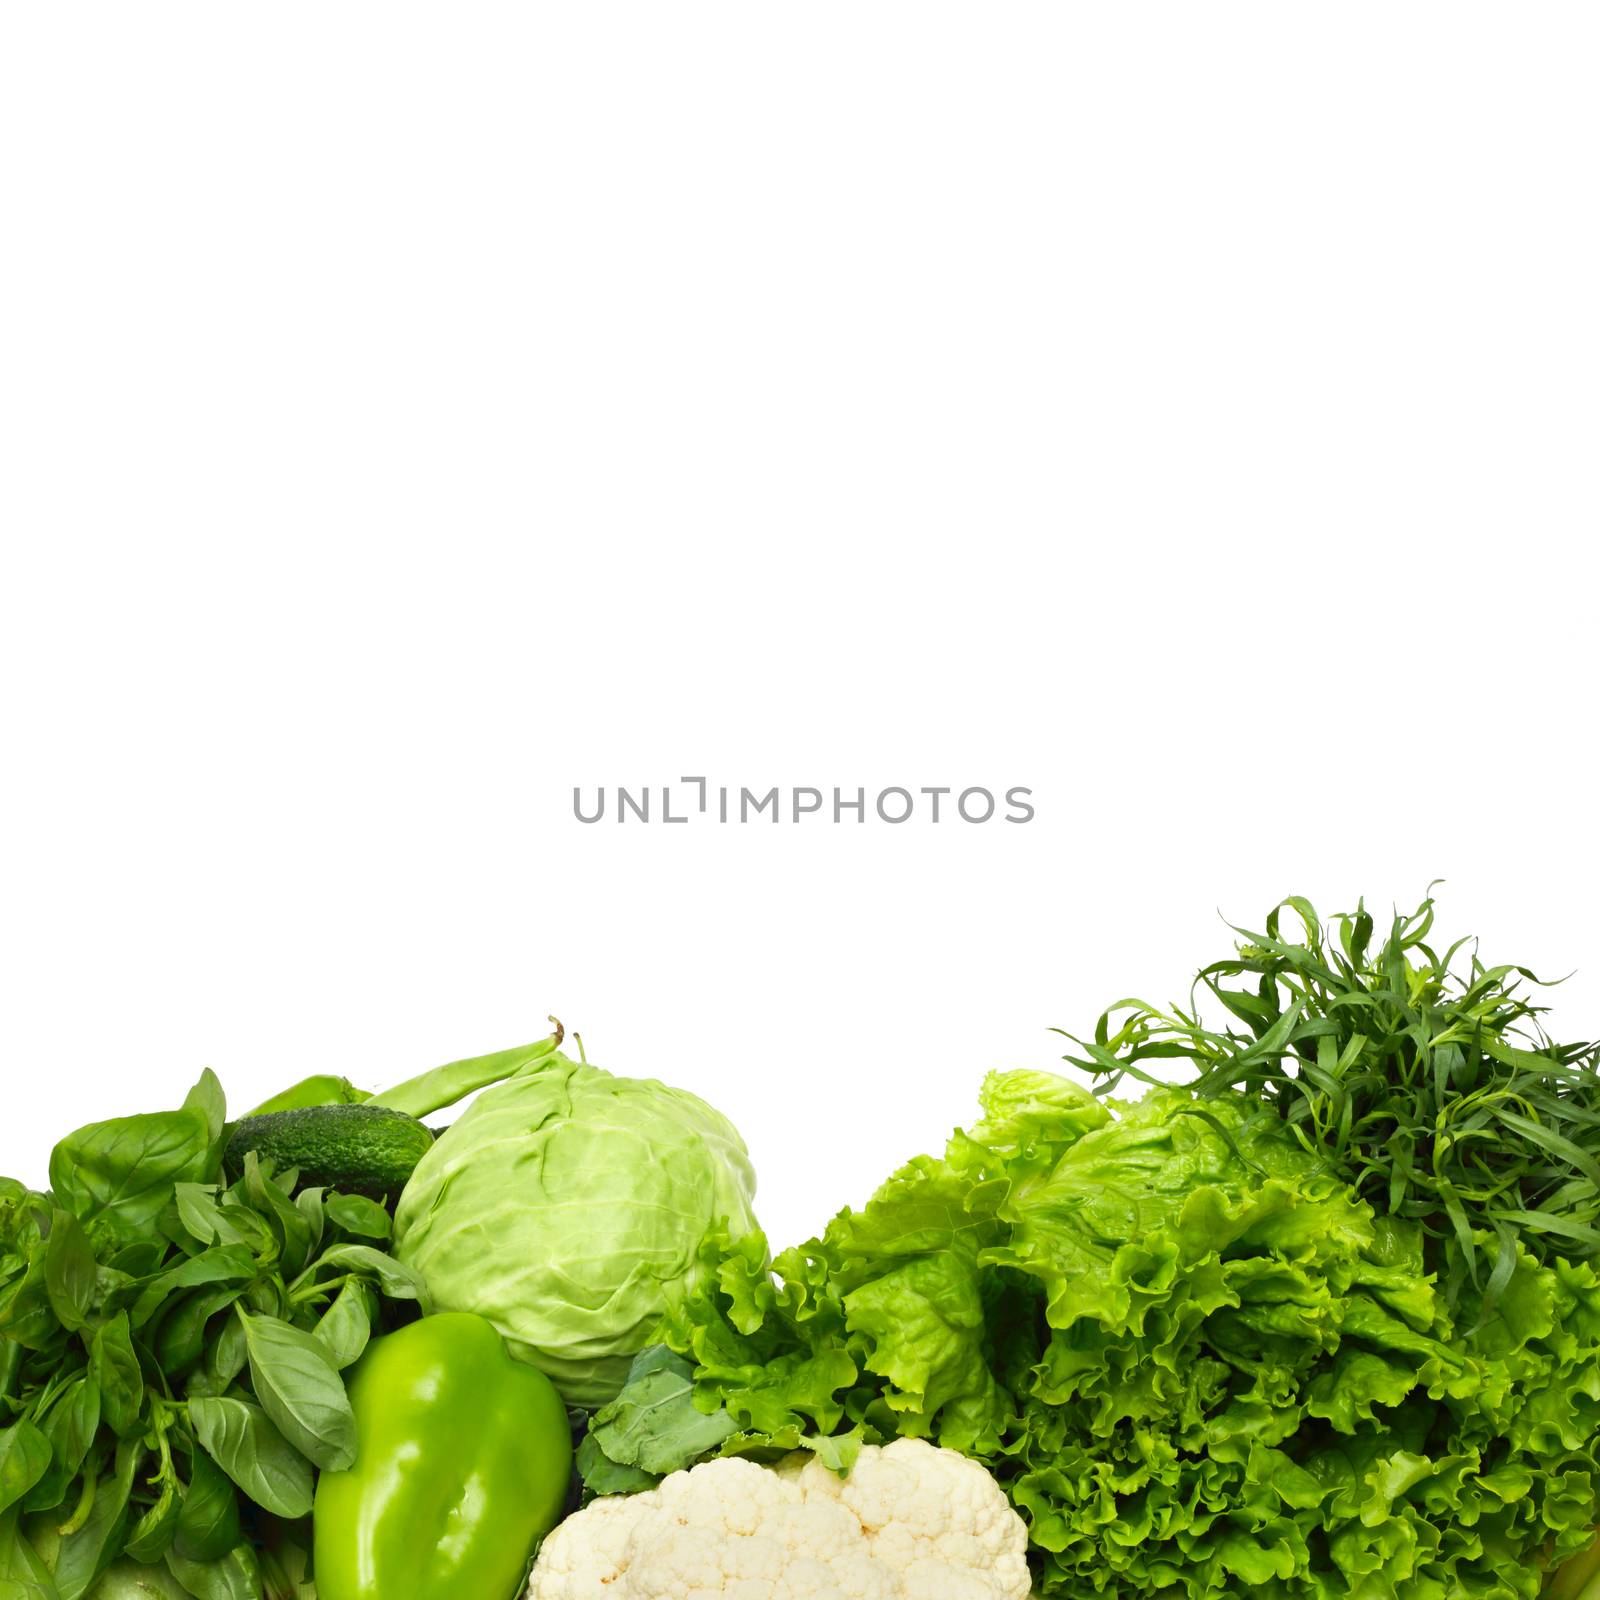 Pile of green vegetables isolated on white background with copy space